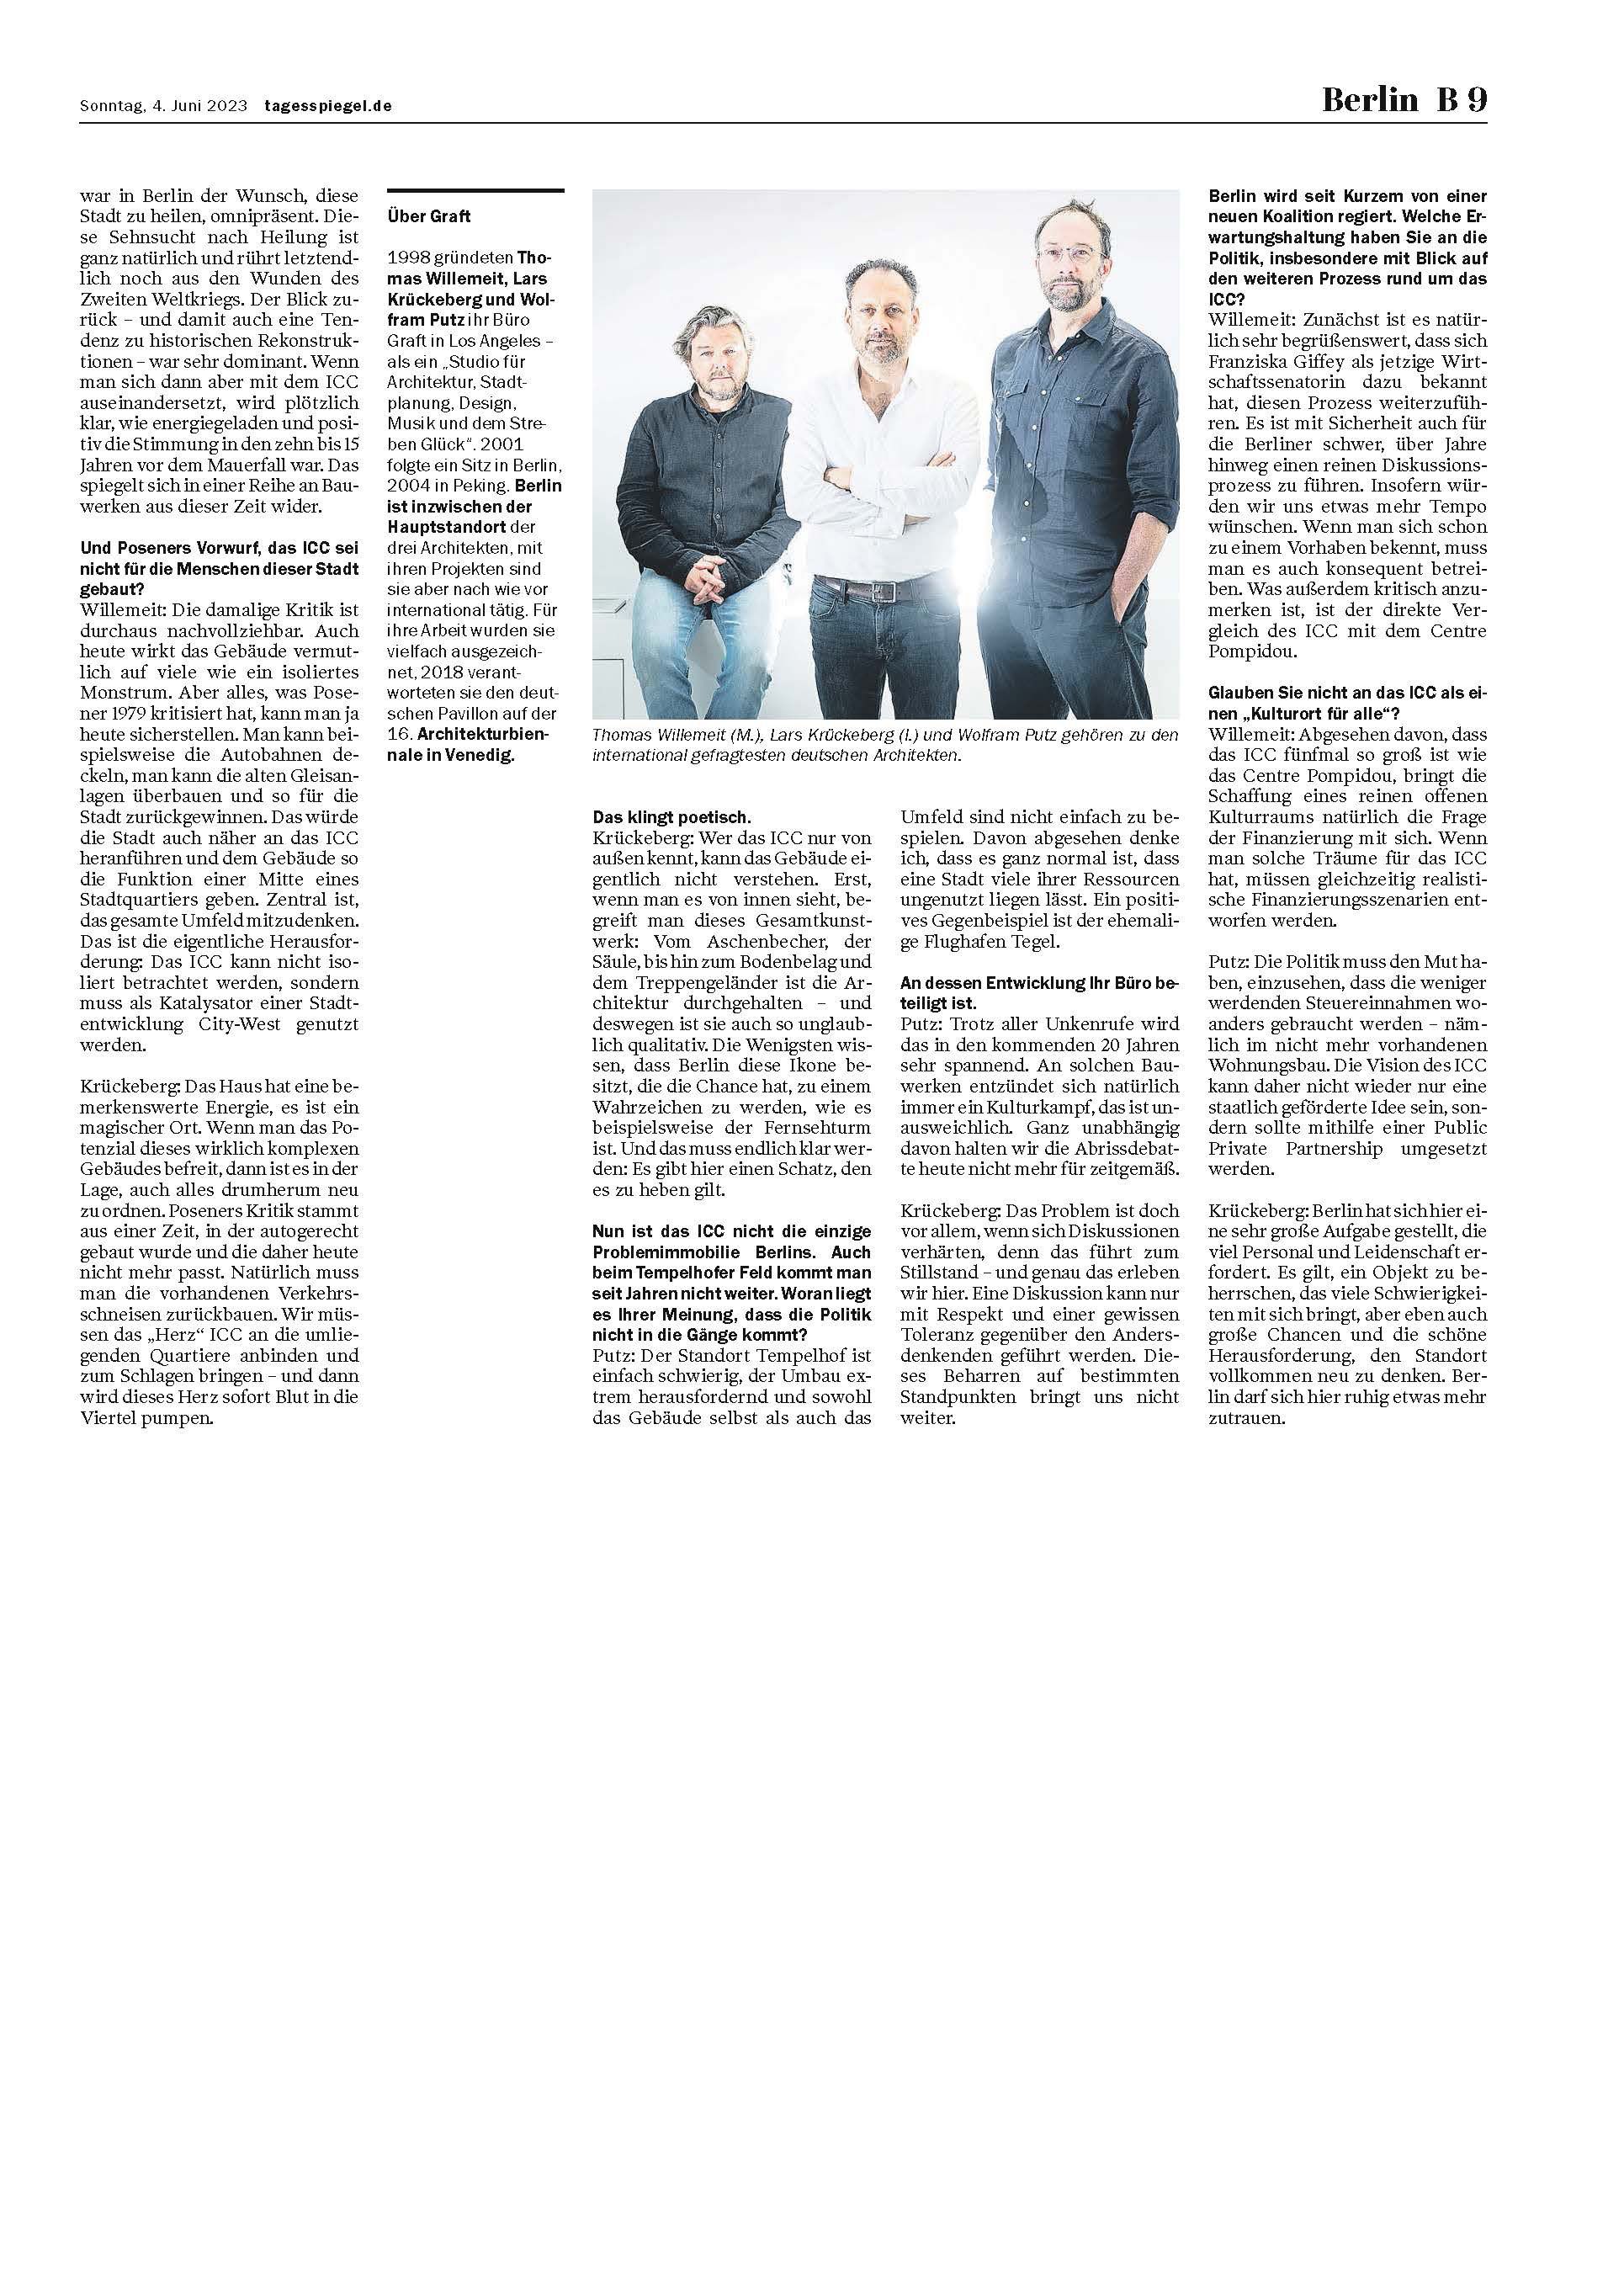 GRAFT Architects Interview with Ronja Merkel discussing the ICC in the Tagesspiegel 